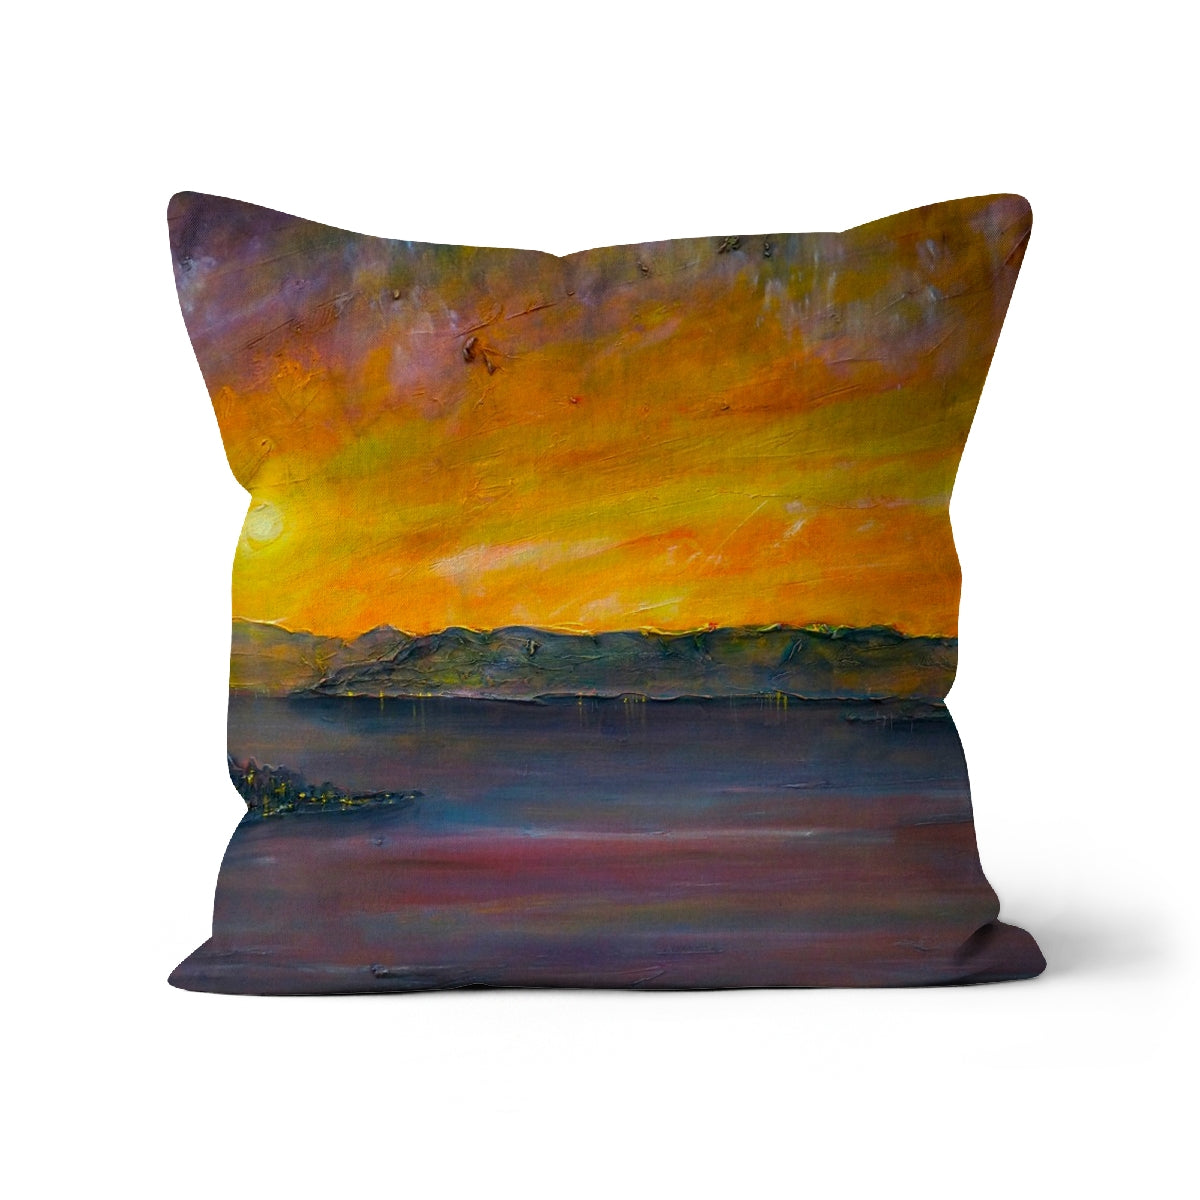 Sunset Over Gourock Art Gifts Cushion-Cushions-River Clyde Art Gallery-Linen-12"x12"-Paintings, Prints, Homeware, Art Gifts From Scotland By Scottish Artist Kevin Hunter